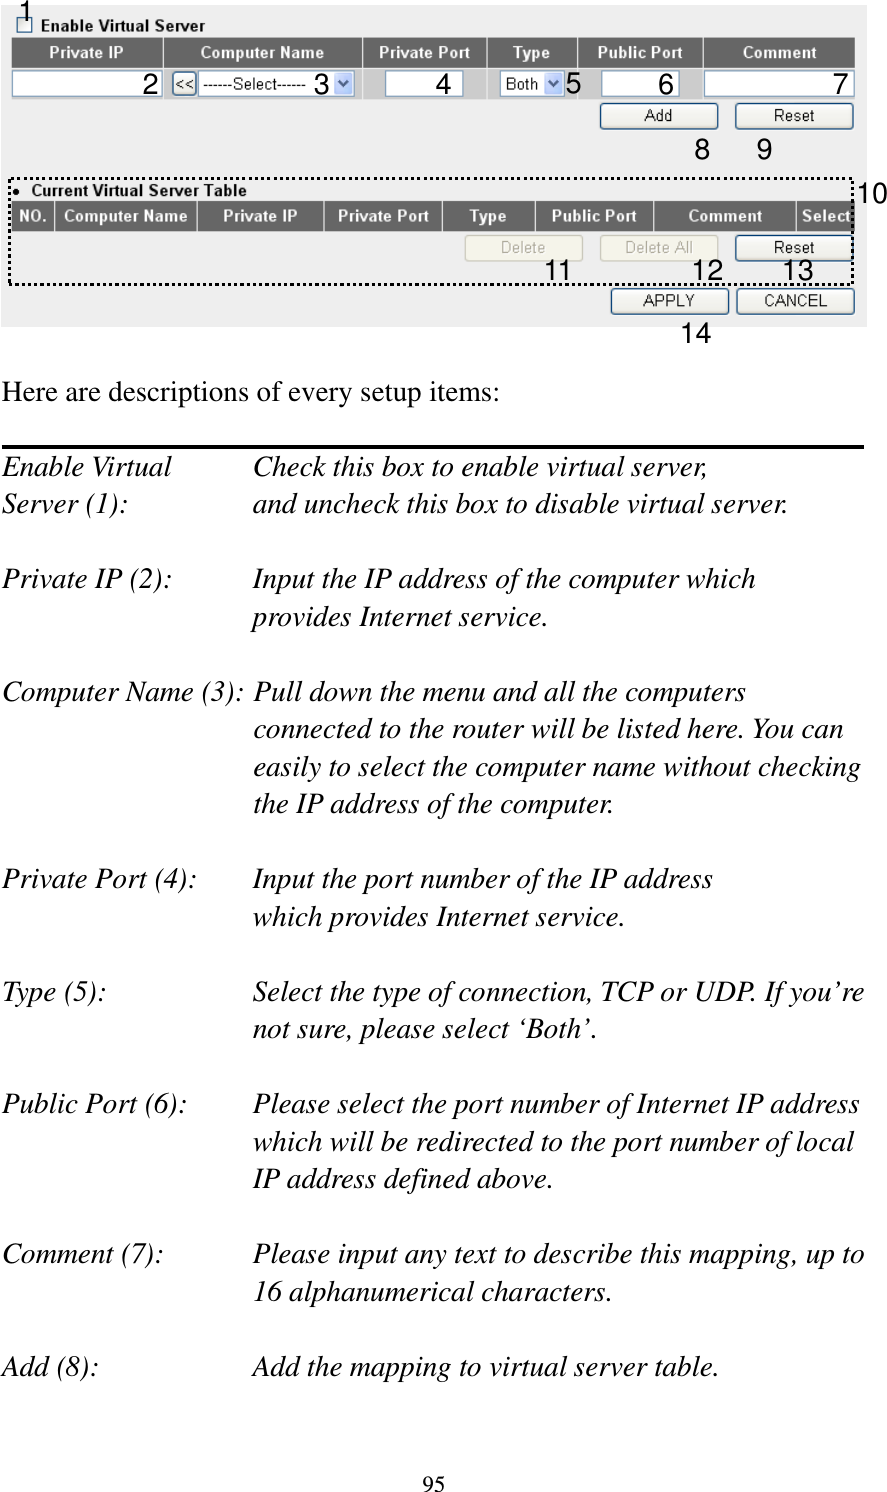 95   Here are descriptions of every setup items:  Enable Virtual      Check this box to enable virtual server, Server (1):       and uncheck this box to disable virtual server.  Private IP (2):      Input the IP address of the computer which      provides Internet service.  Computer Name (3): Pull down the menu and all the computers connected to the router will be listed here. You can easily to select the computer name without checking the IP address of the computer.  Private Port (4):    Input the port number of the IP address      which provides Internet service.  Type (5):    Select the type of connection, TCP or UDP. If you’re not sure, please select ‘Both’.  Public Port (6):    Please select the port number of Internet IP address which will be redirected to the port number of local IP address defined above.  Comment (7):    Please input any text to describe this mapping, up to 16 alphanumerical characters.  Add (8):        Add the mapping to virtual server table.  1 2 3 4 5 8 9 10 11 12 13 14 7 6 